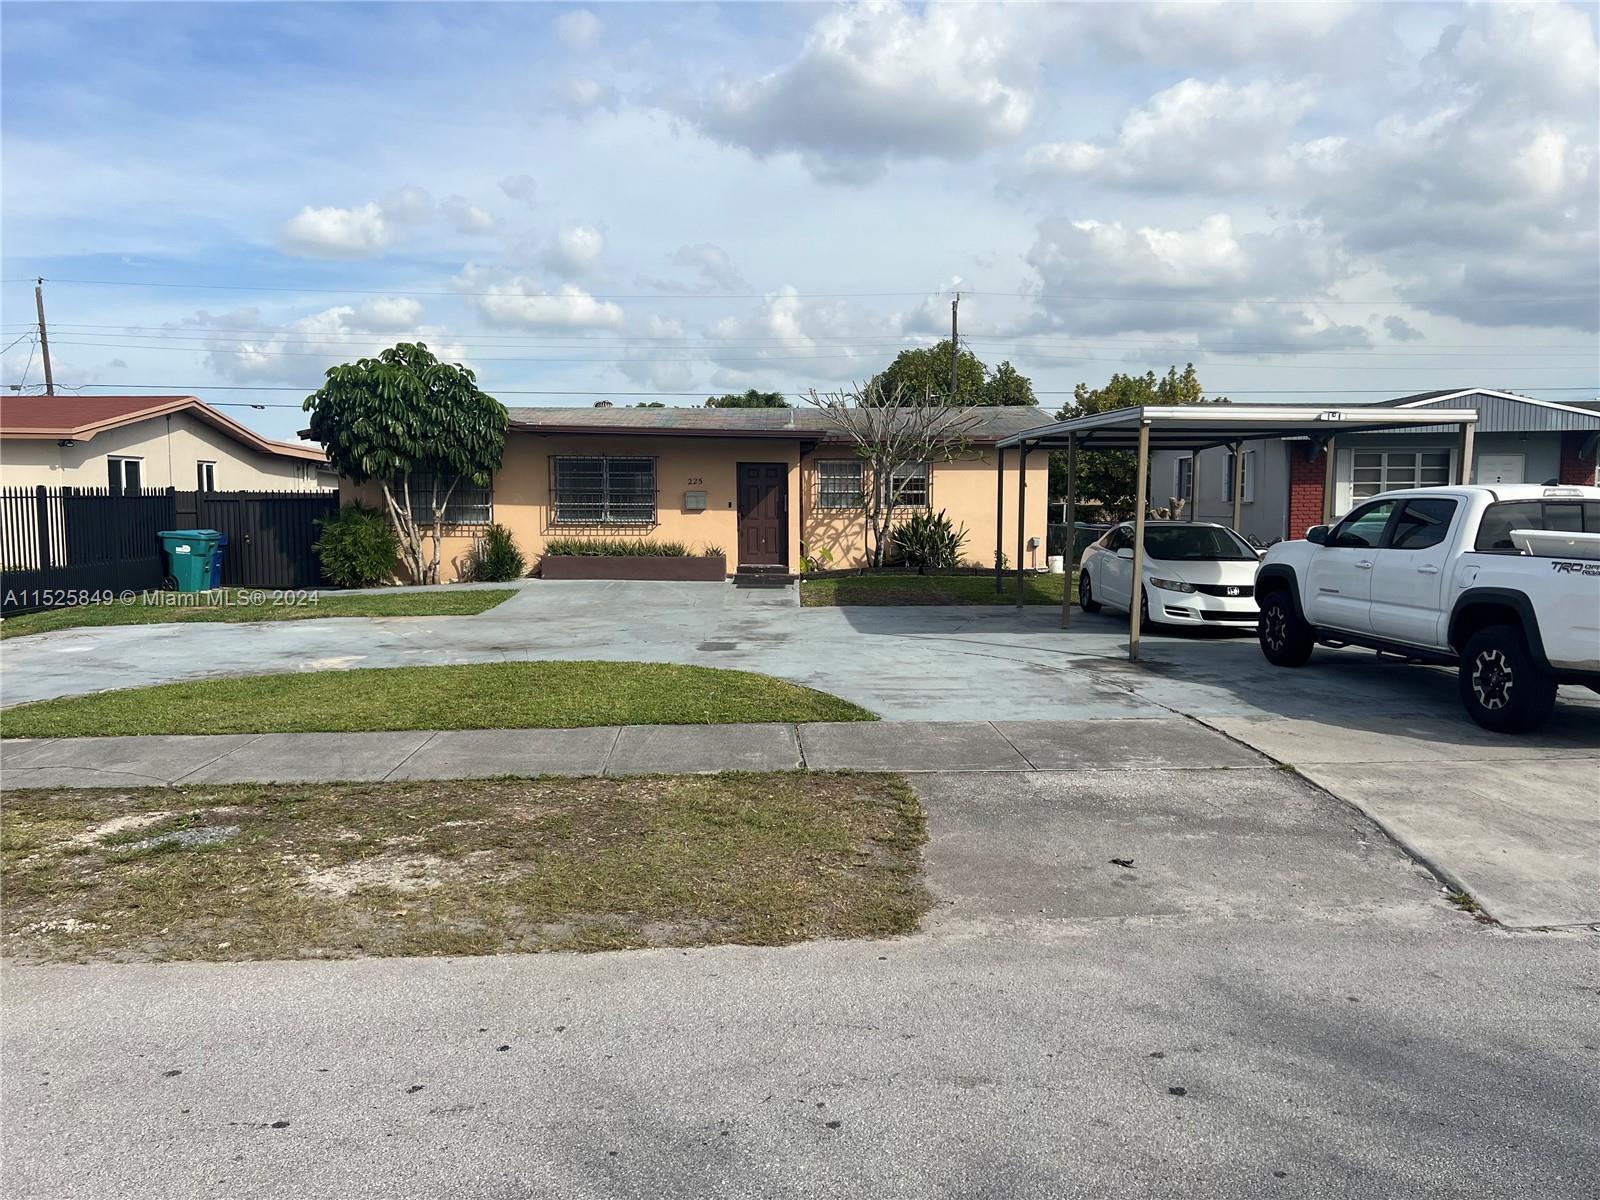 Photo of 225 SW 104th Ct in Sweetwater, FL